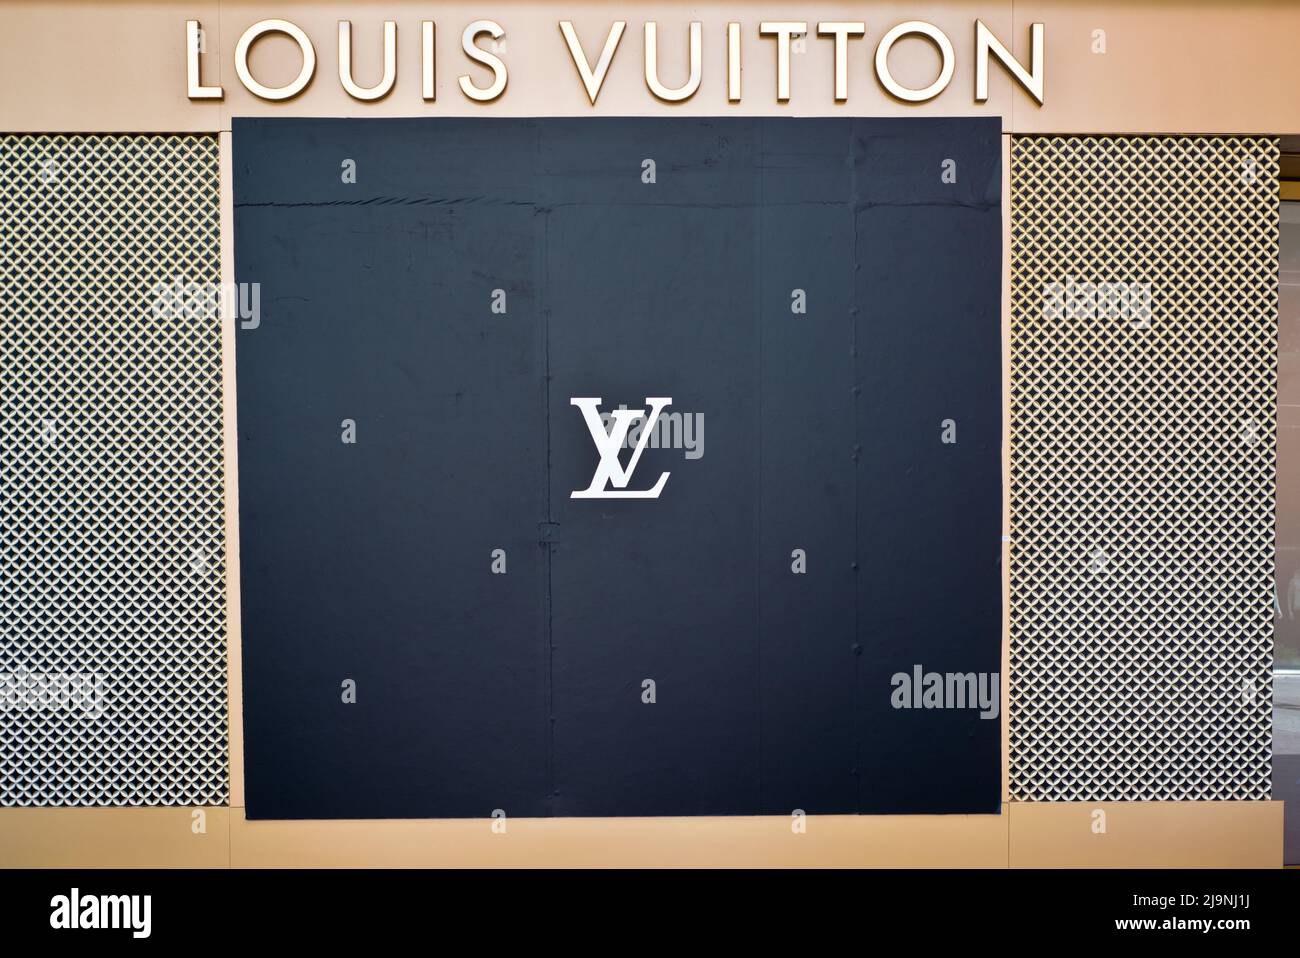 Shops With Louis Vuitton In Manchester